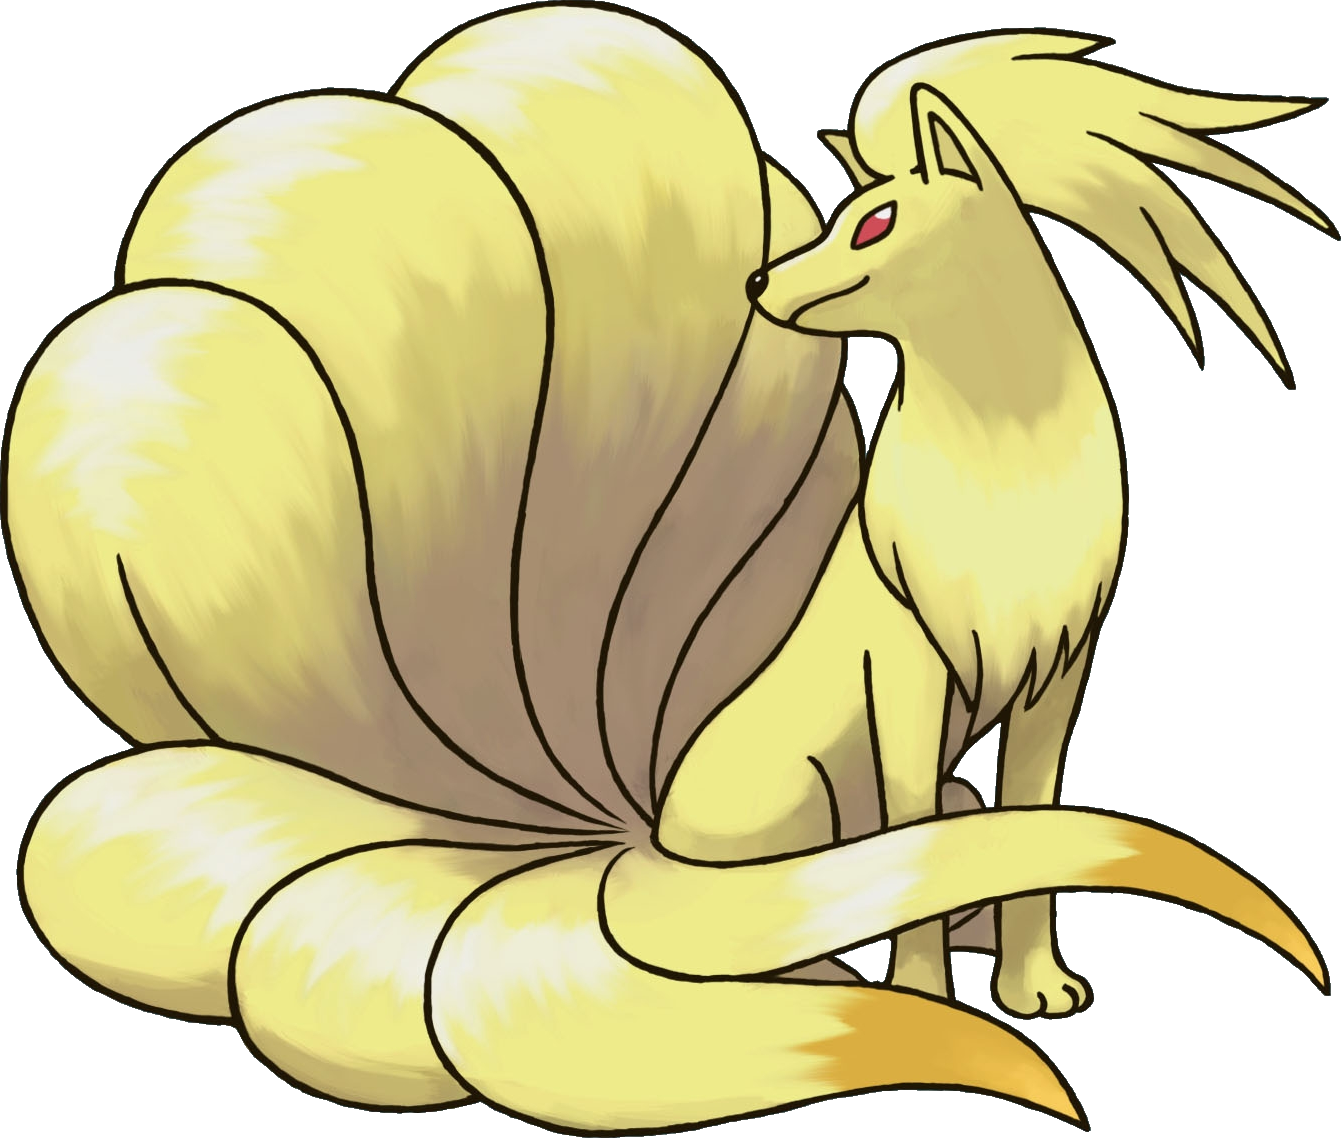 038ninetales Pokemon Mystery Dungeon Red And Blue Rescue - Cat O Nine Tails...